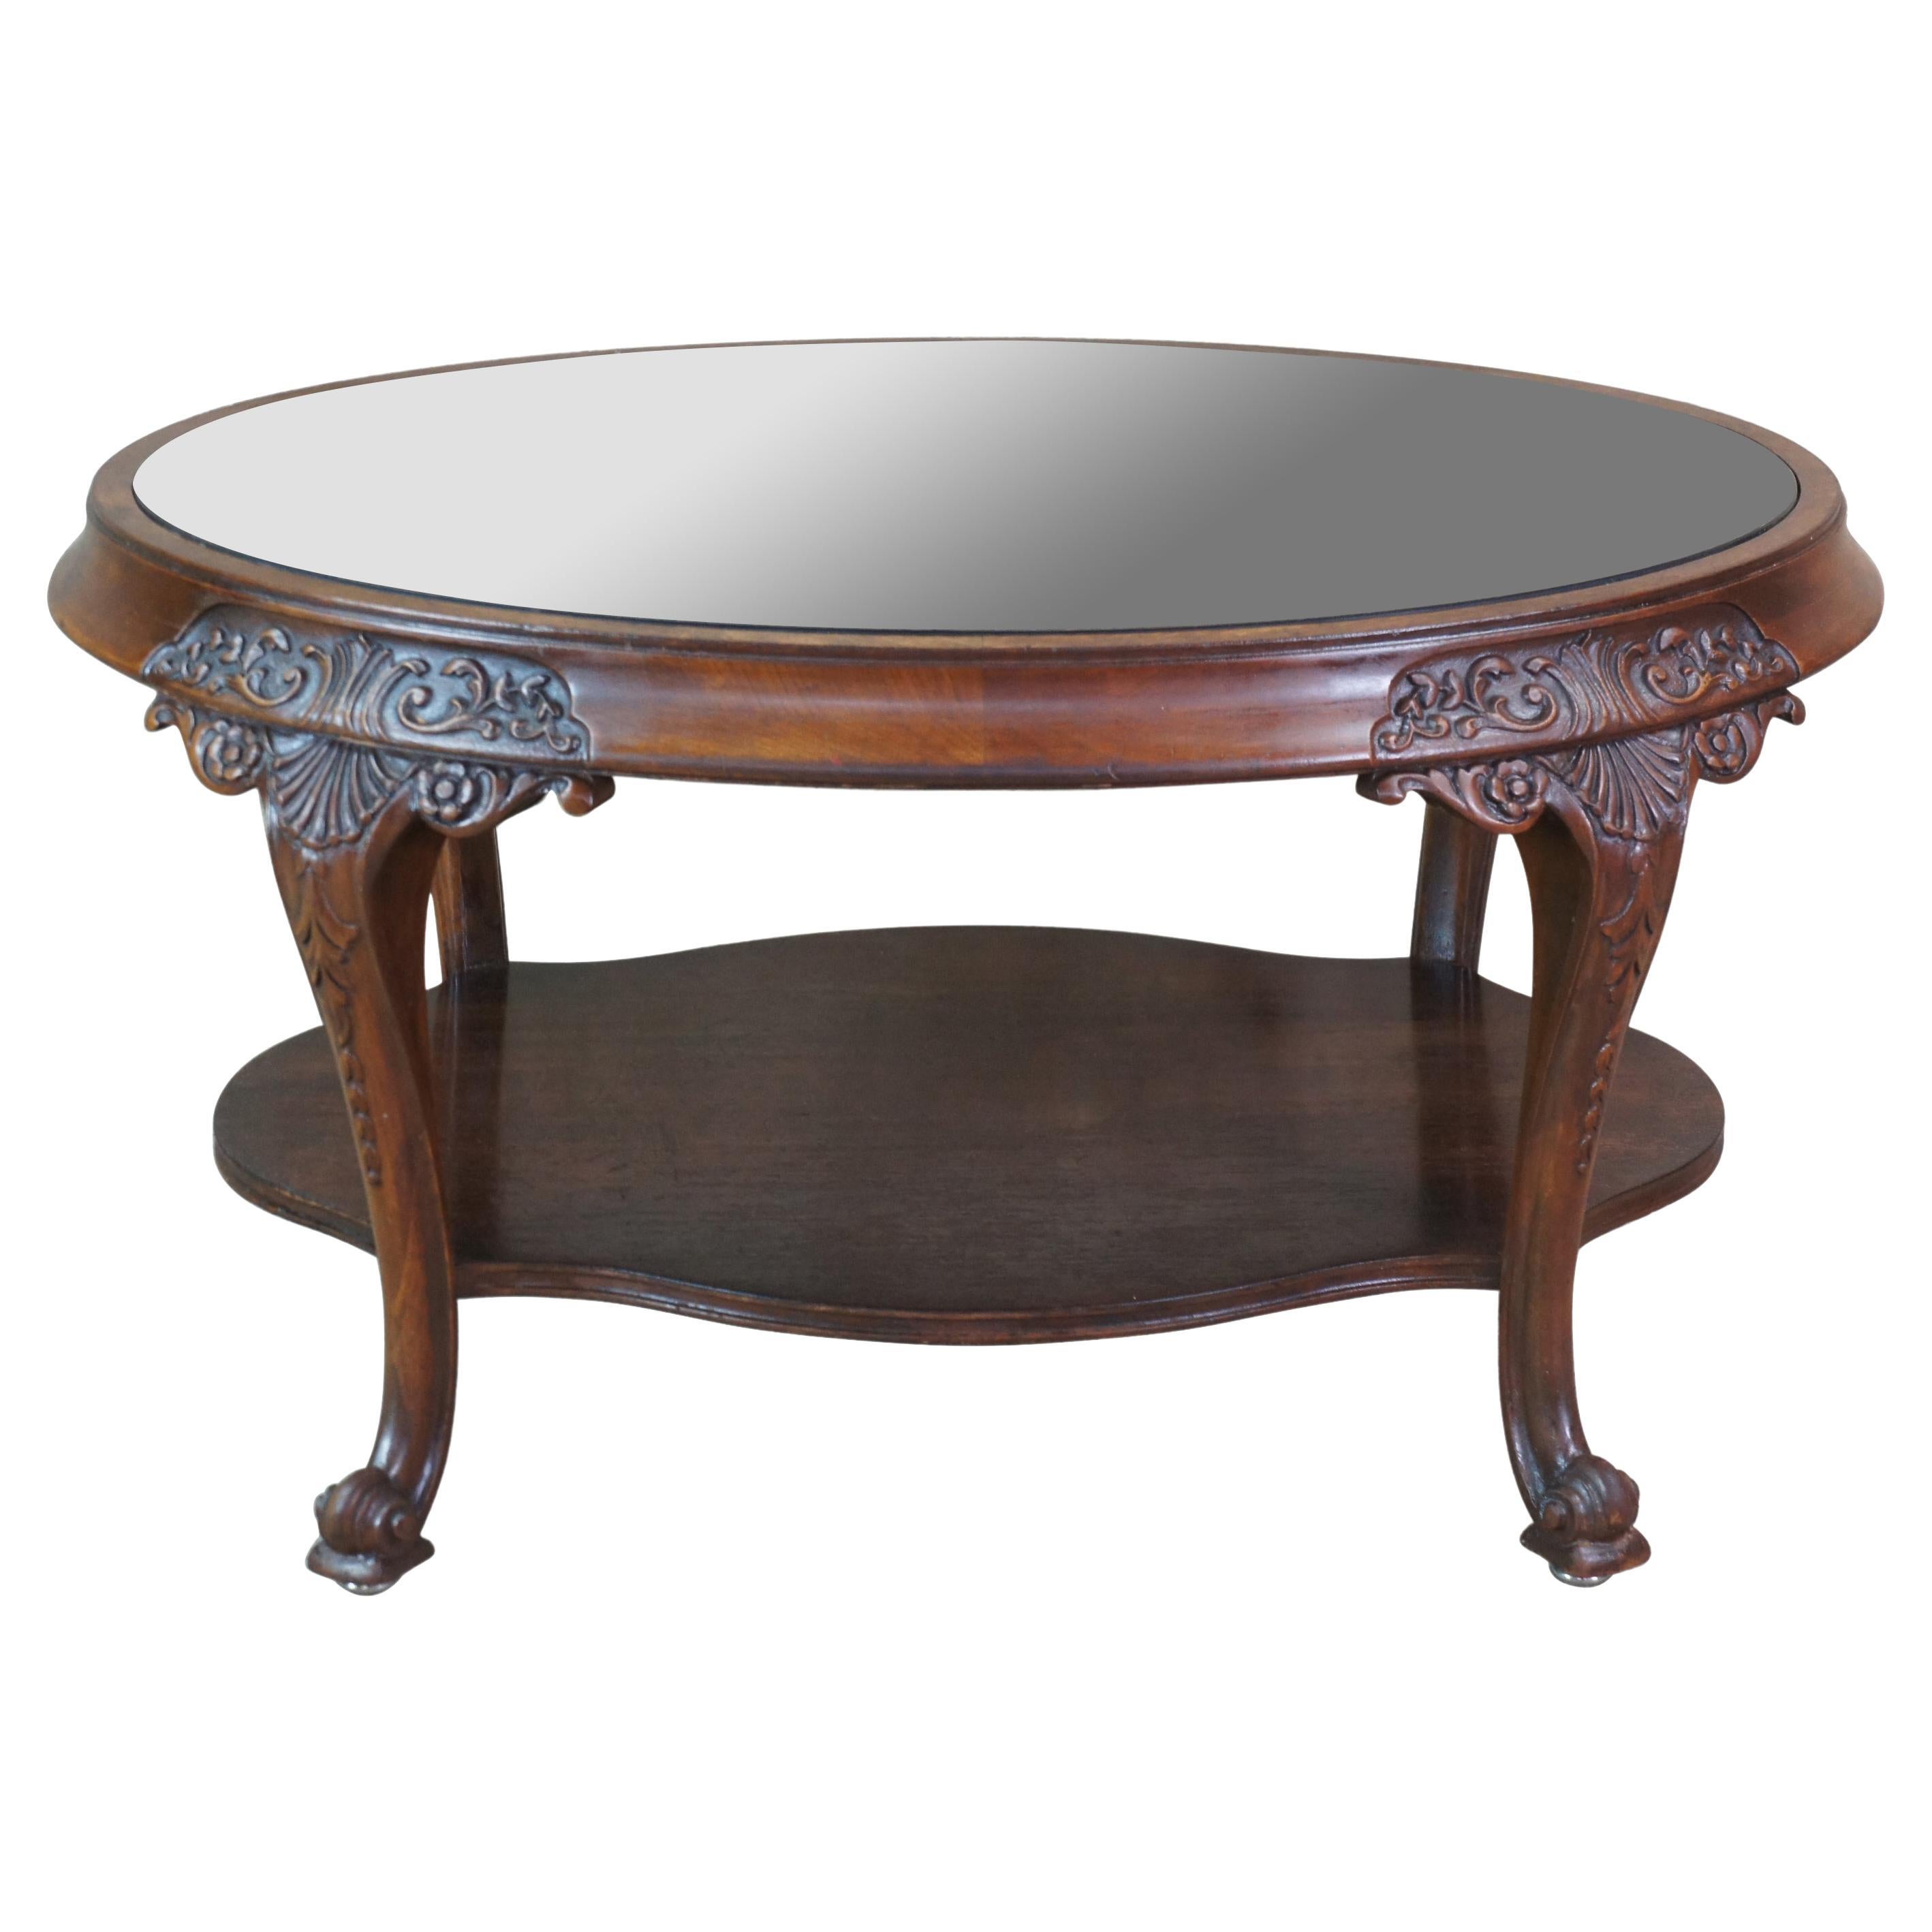 Antique Imperial Furniture Mahogany Glass Two Tier Oval Coffee Side Table